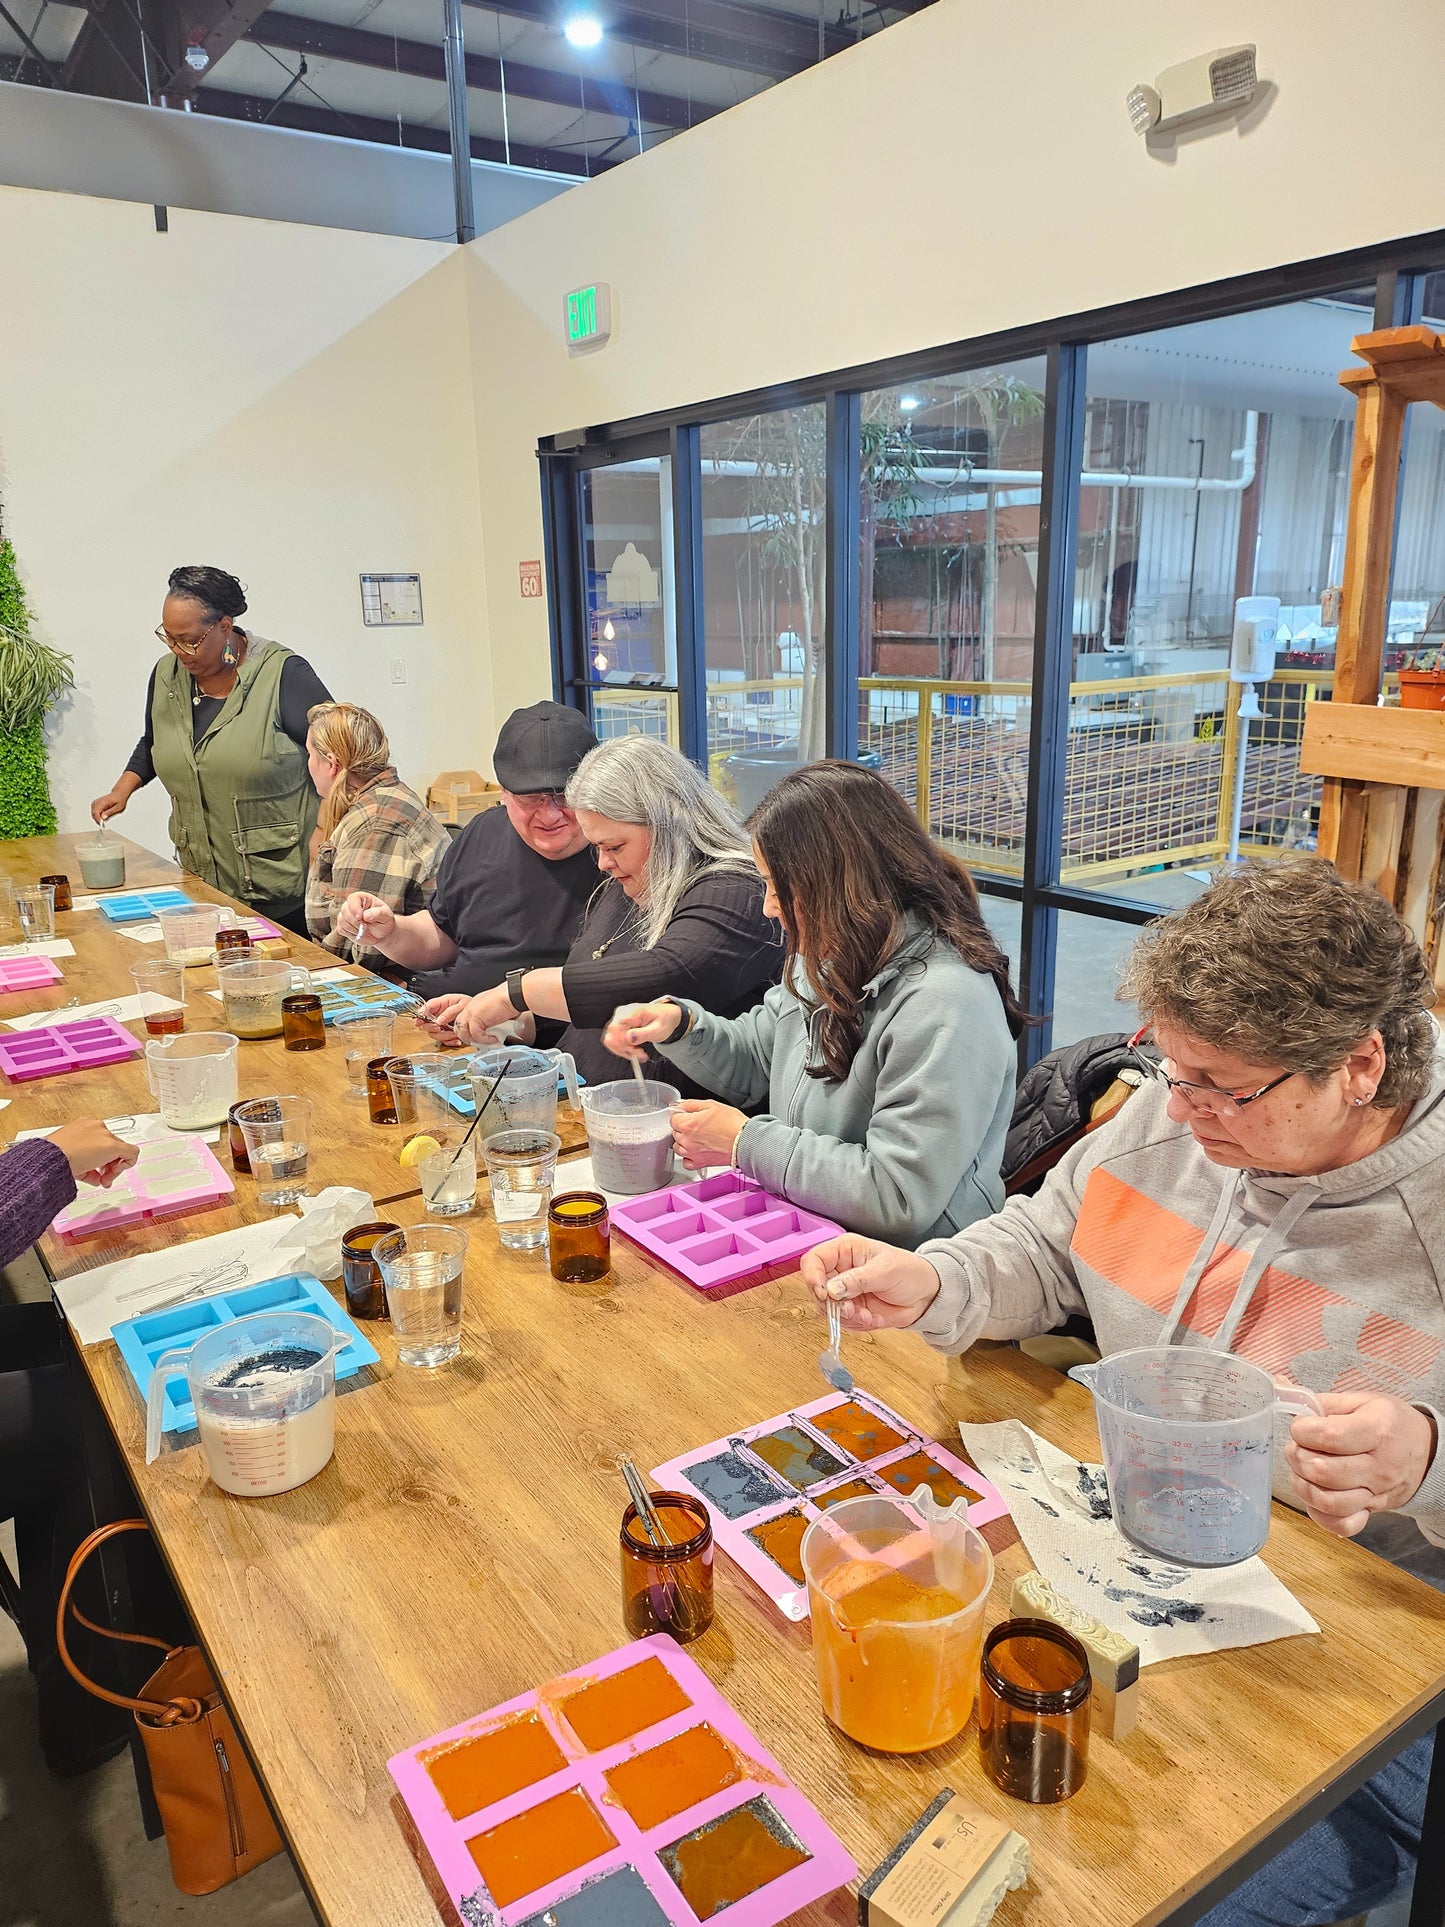 Us Soap and Body: Soap Making Class